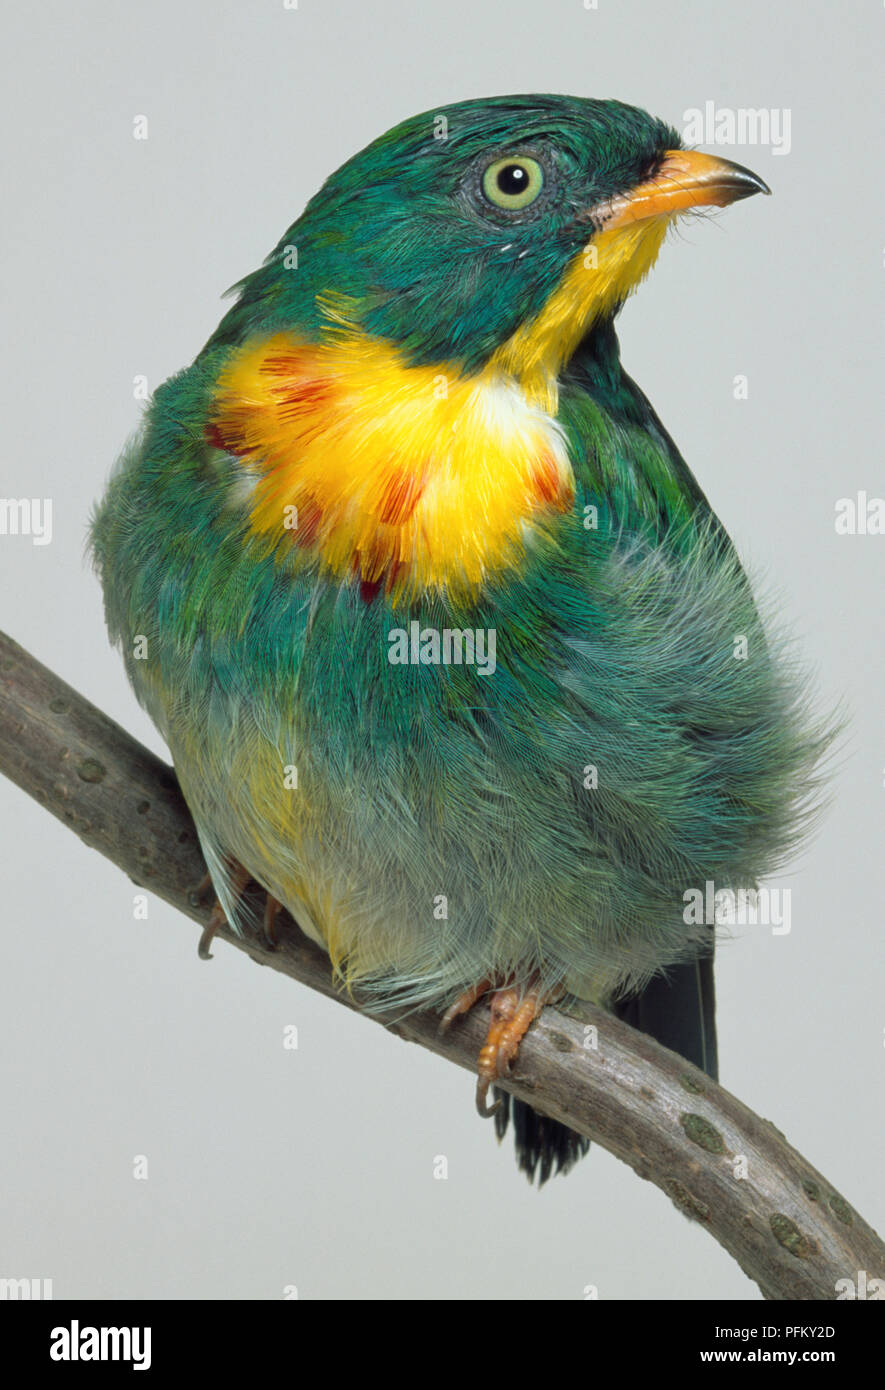 Front view of a Fiery-Throated Fruiteater, perched on a branch, showing the head in profile. Stock Photo